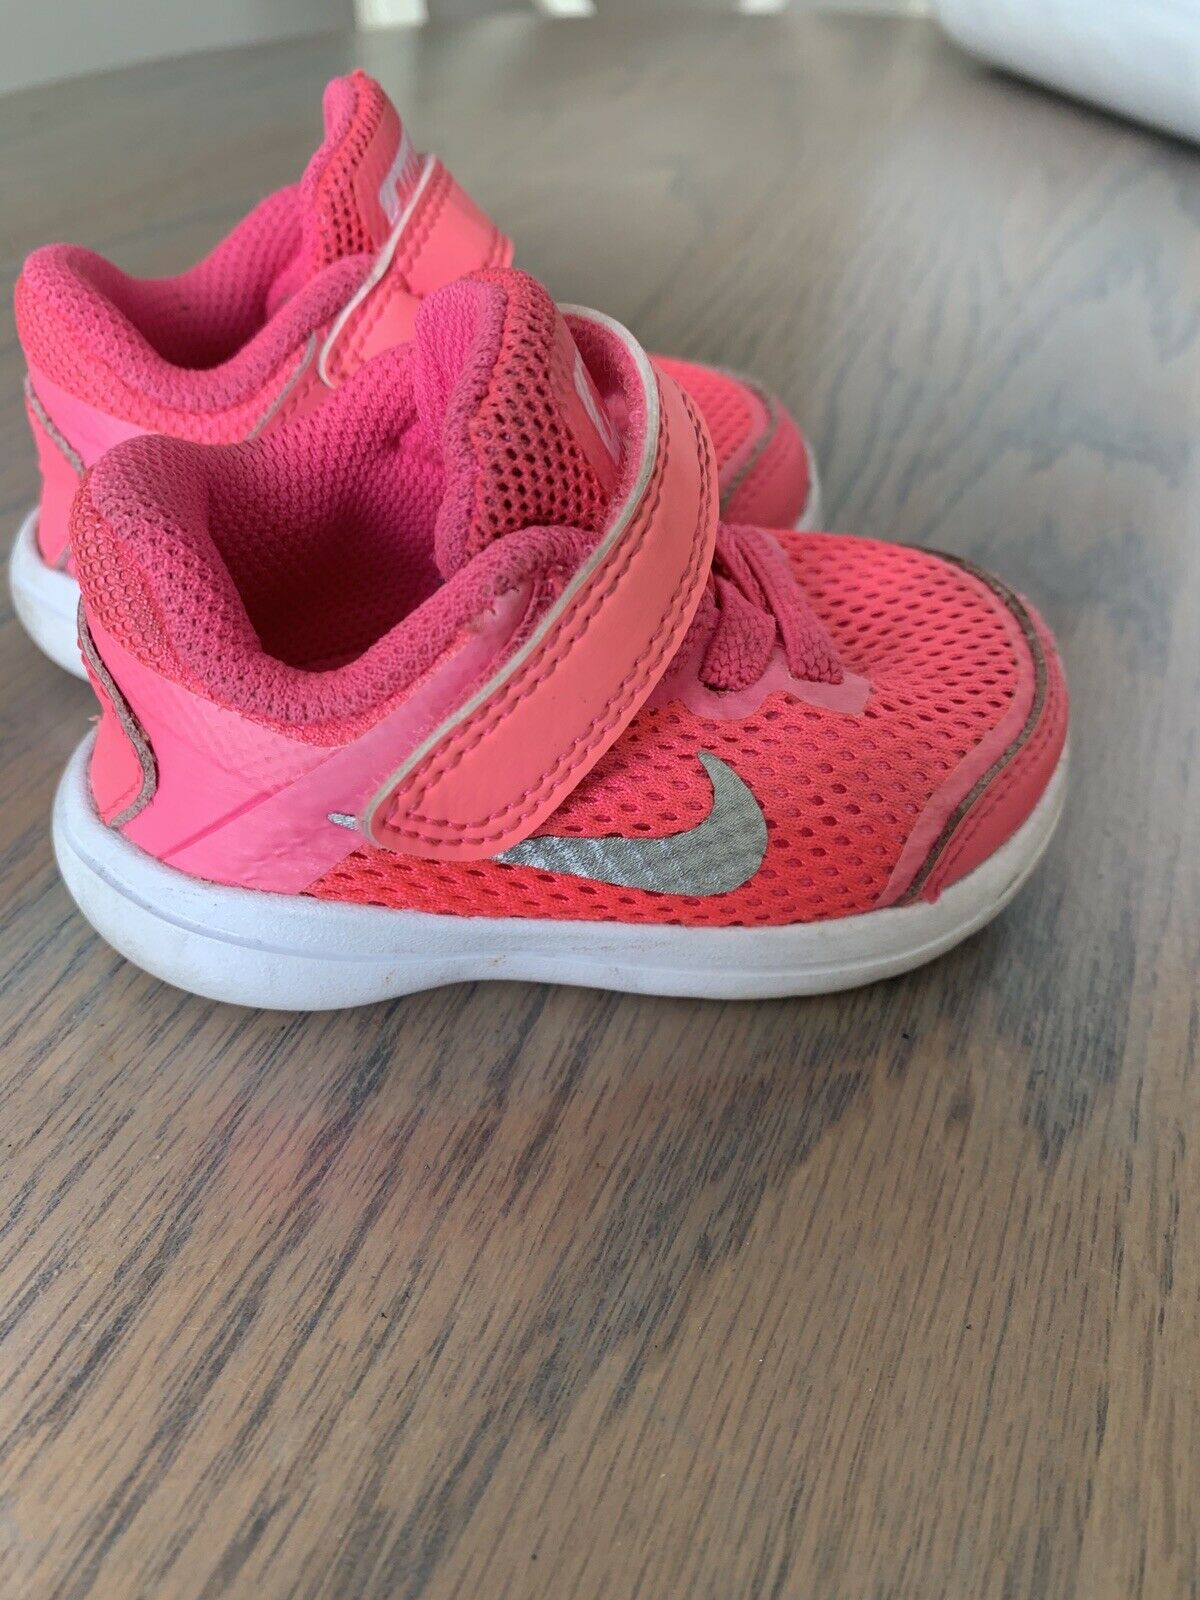 NIKE Baby Infant Girl Shoes Sneaker Athletic Size 3 Hot Pink Logo